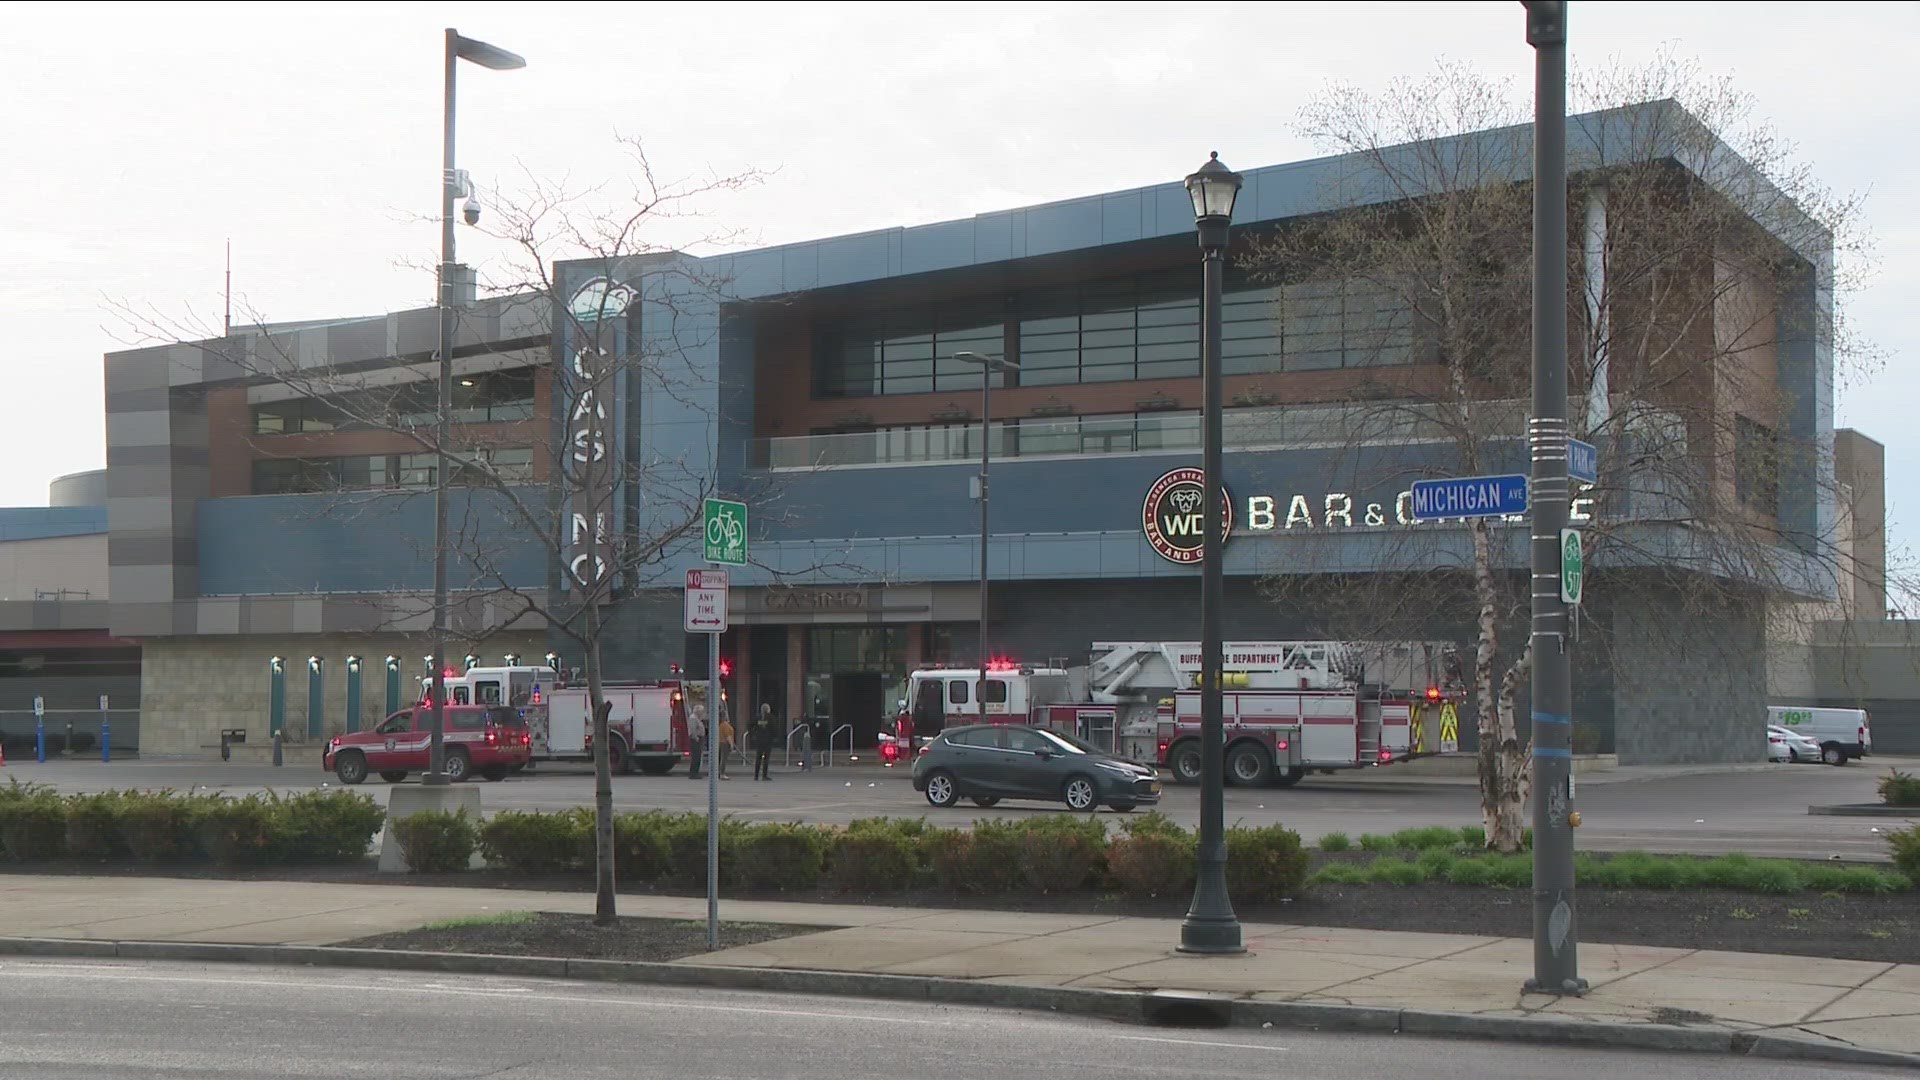 The fire began around 7 a.m. Sunday in a second floor storage area at the downtown Buffalo casino